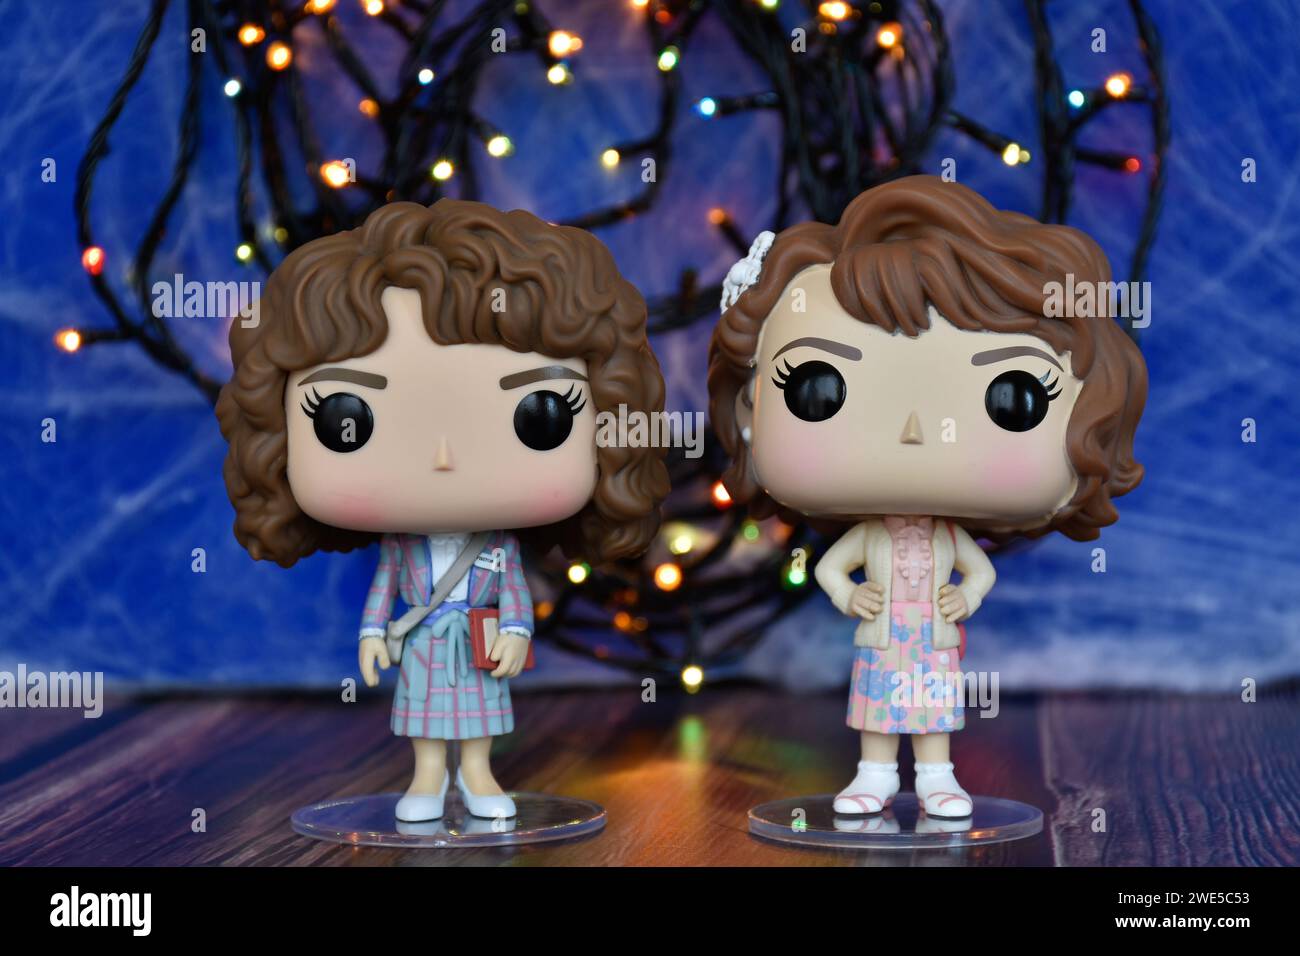 Funko Pop action figures of Nancy and Robin as academics from Netflix TV series Stranger Things. Blue foggy background, colorful lights, mysterious. Stock Photo